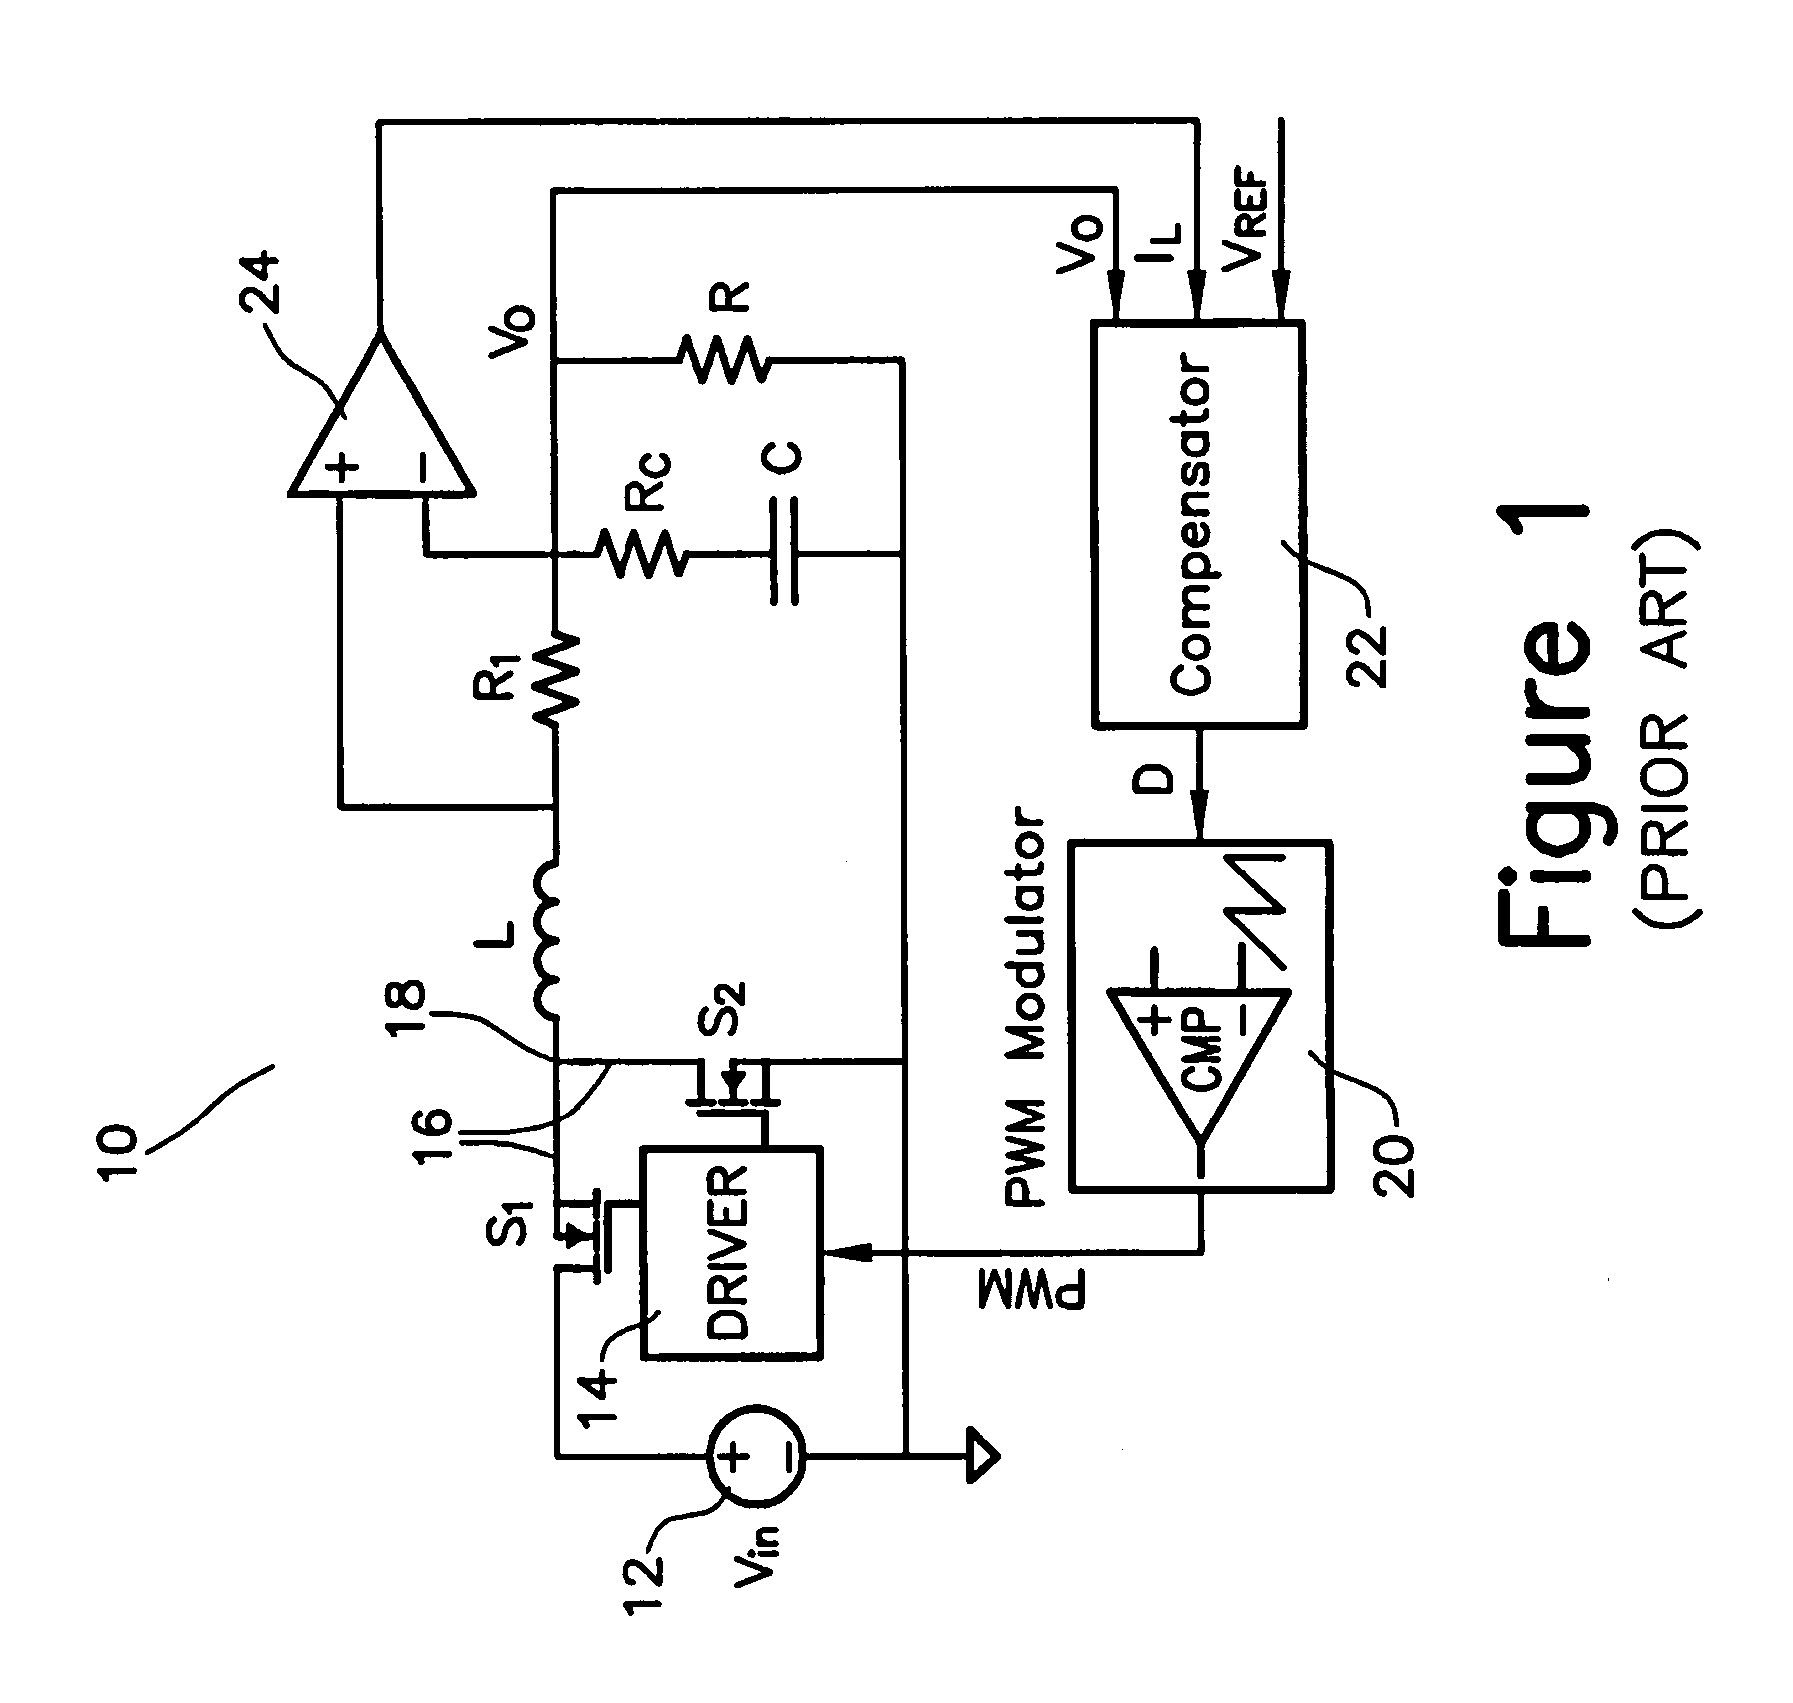 Method and apparatus for improving light load efficiency in switching power supplies